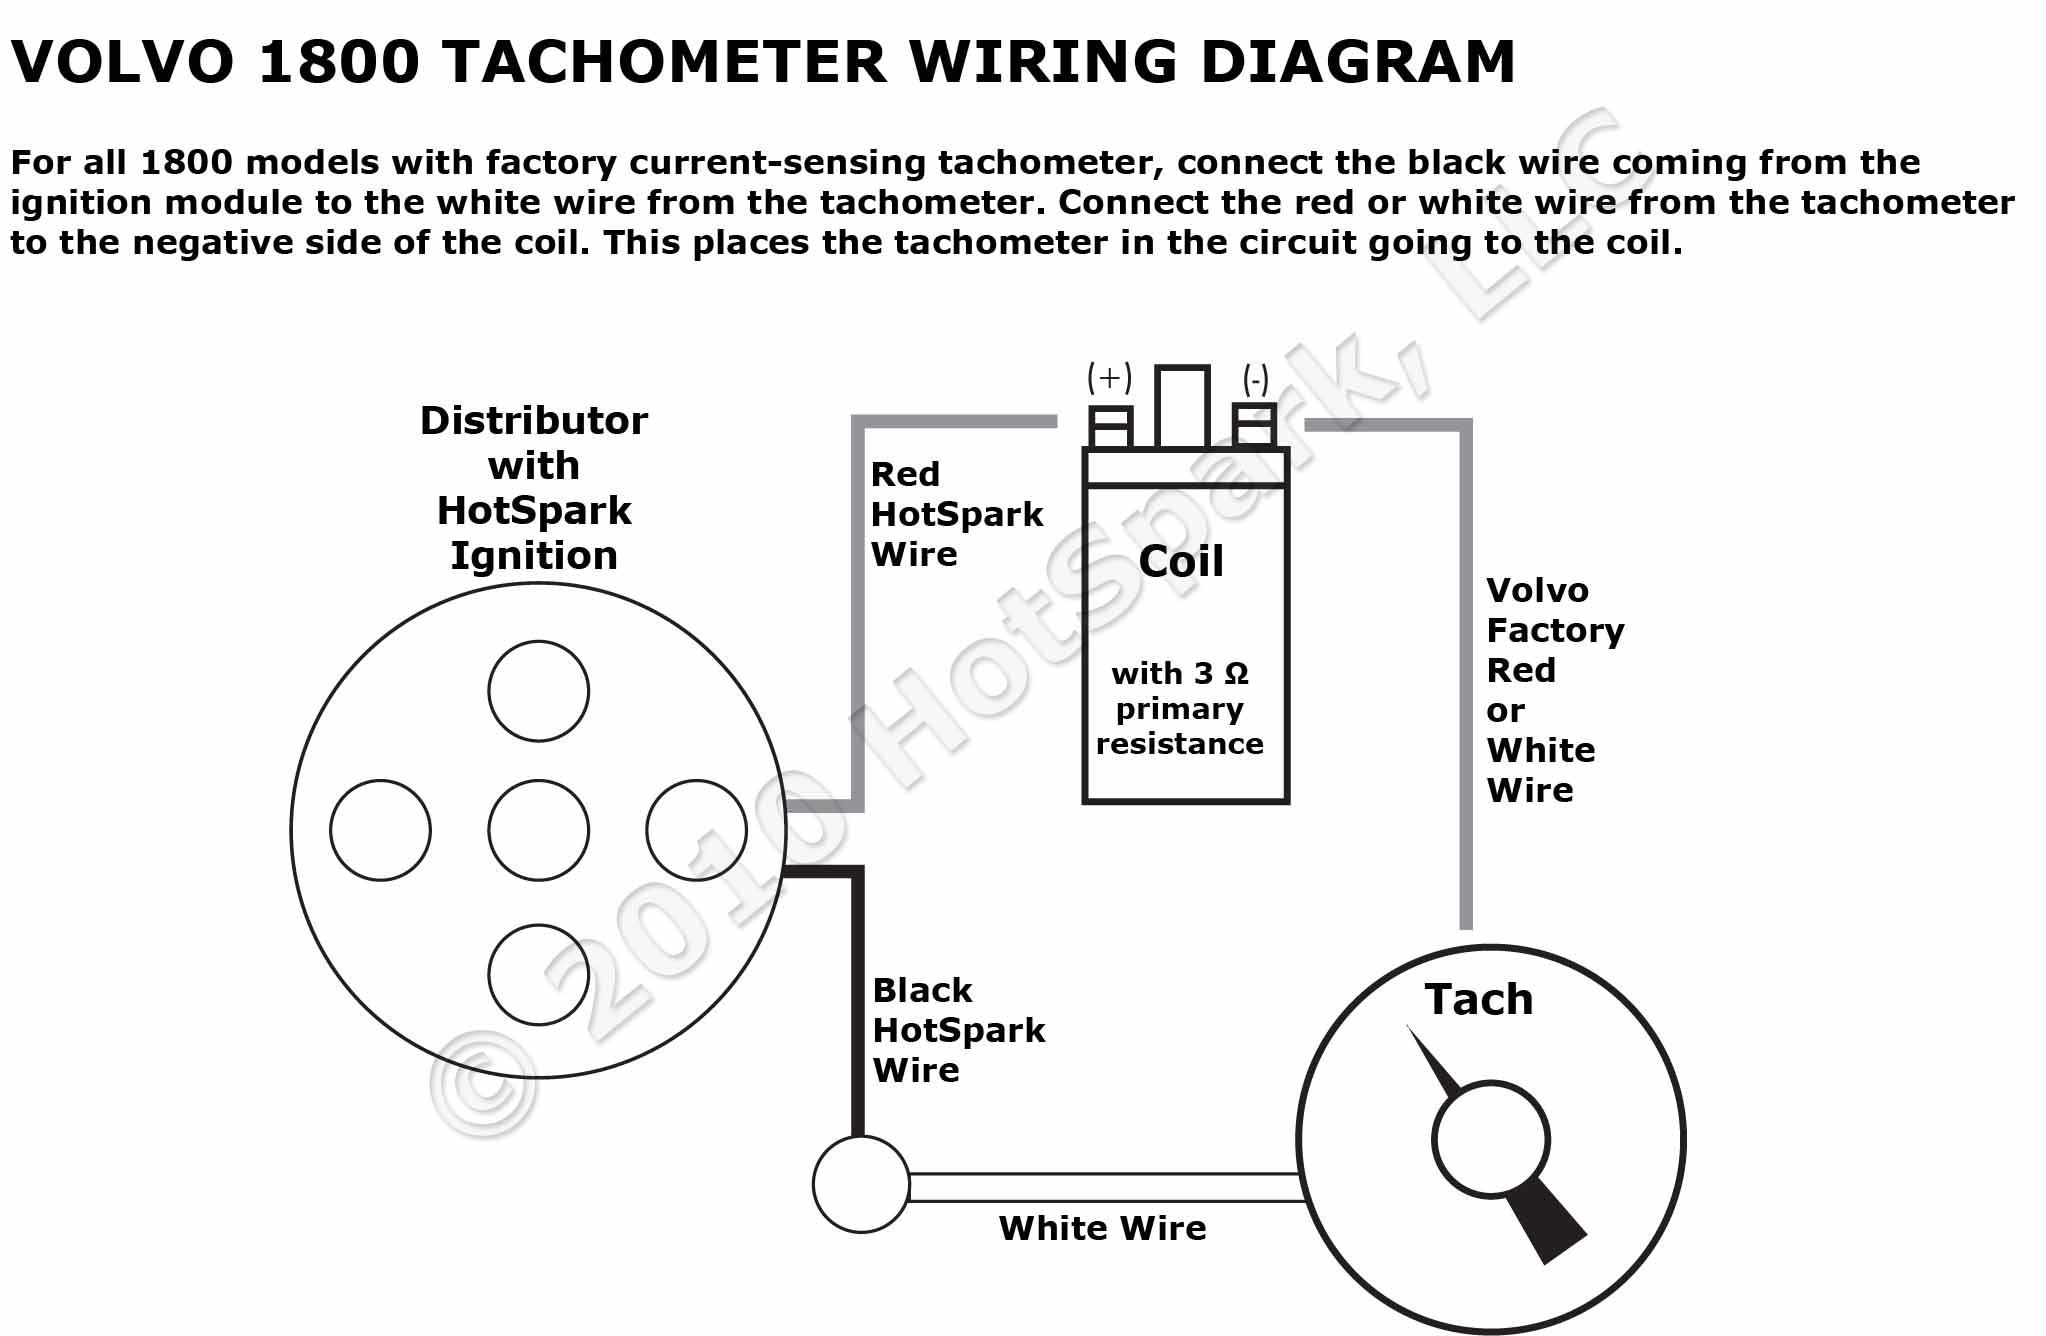 Volvo 1800 Tachometer Wiring Diagram With Hotspark